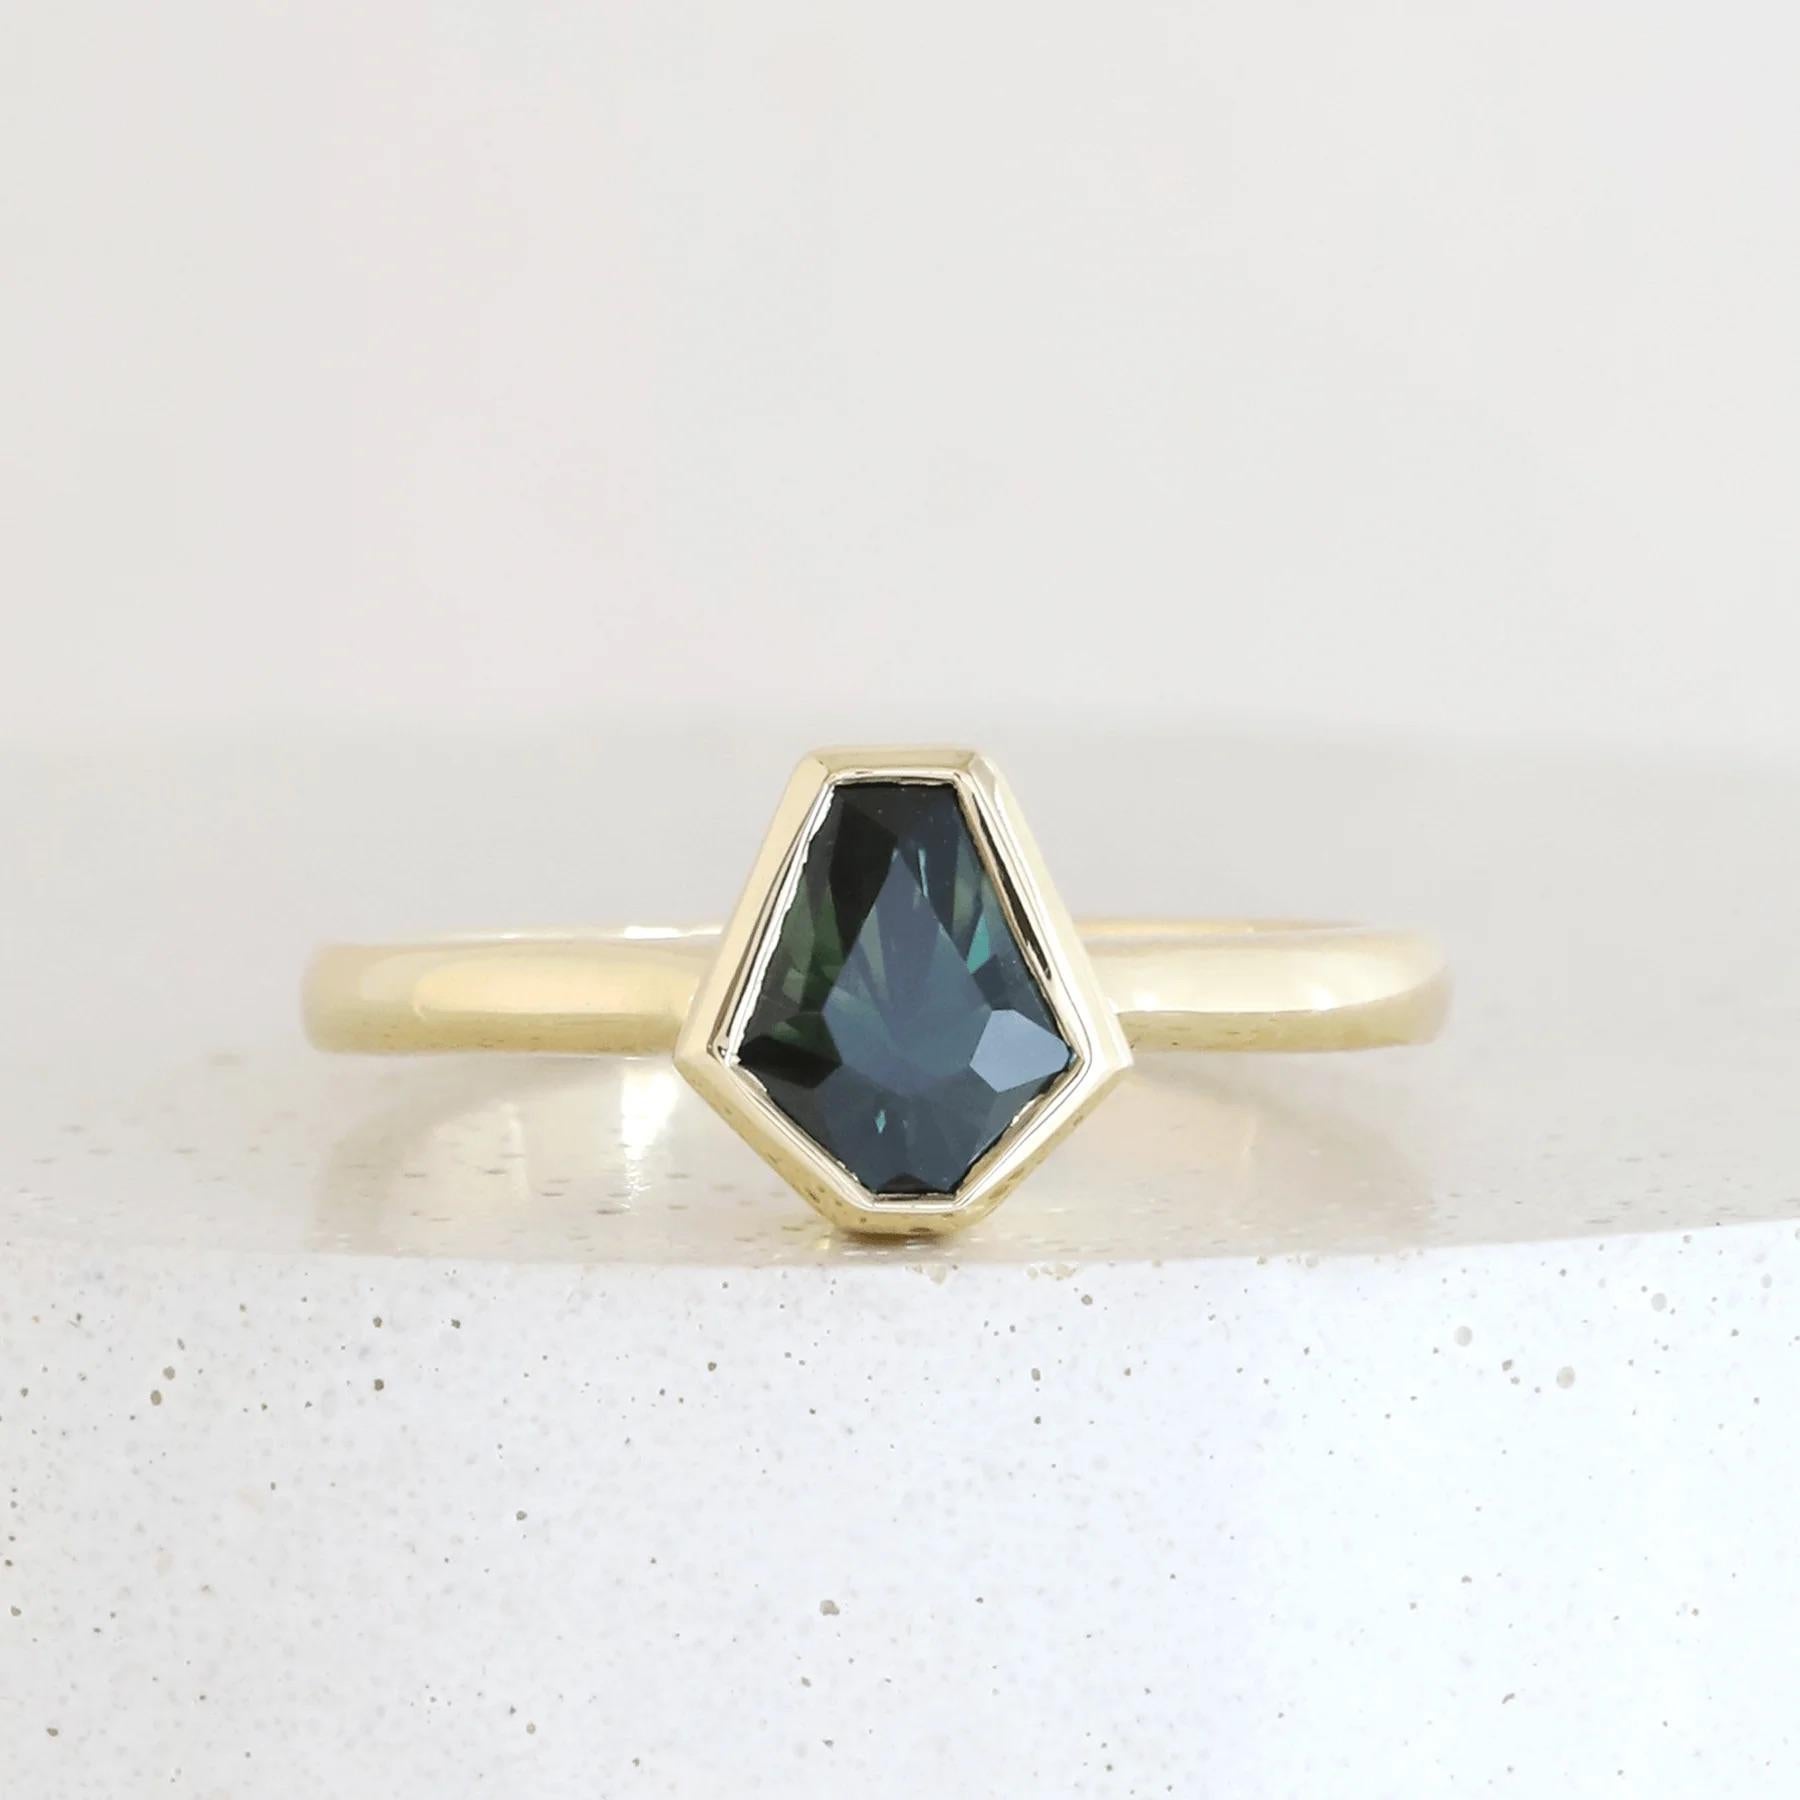 18K Yellow Gold Coffin Ring with Gem Lab Certified Australian Green Sapphire

This is custom made halo ring with pave, made in FTJCo's exclusive 18K AKARA People+Planet Yellow Gold.*
 
Set with a 1.19ct Velvet Green Modified Hexagon Step-cut